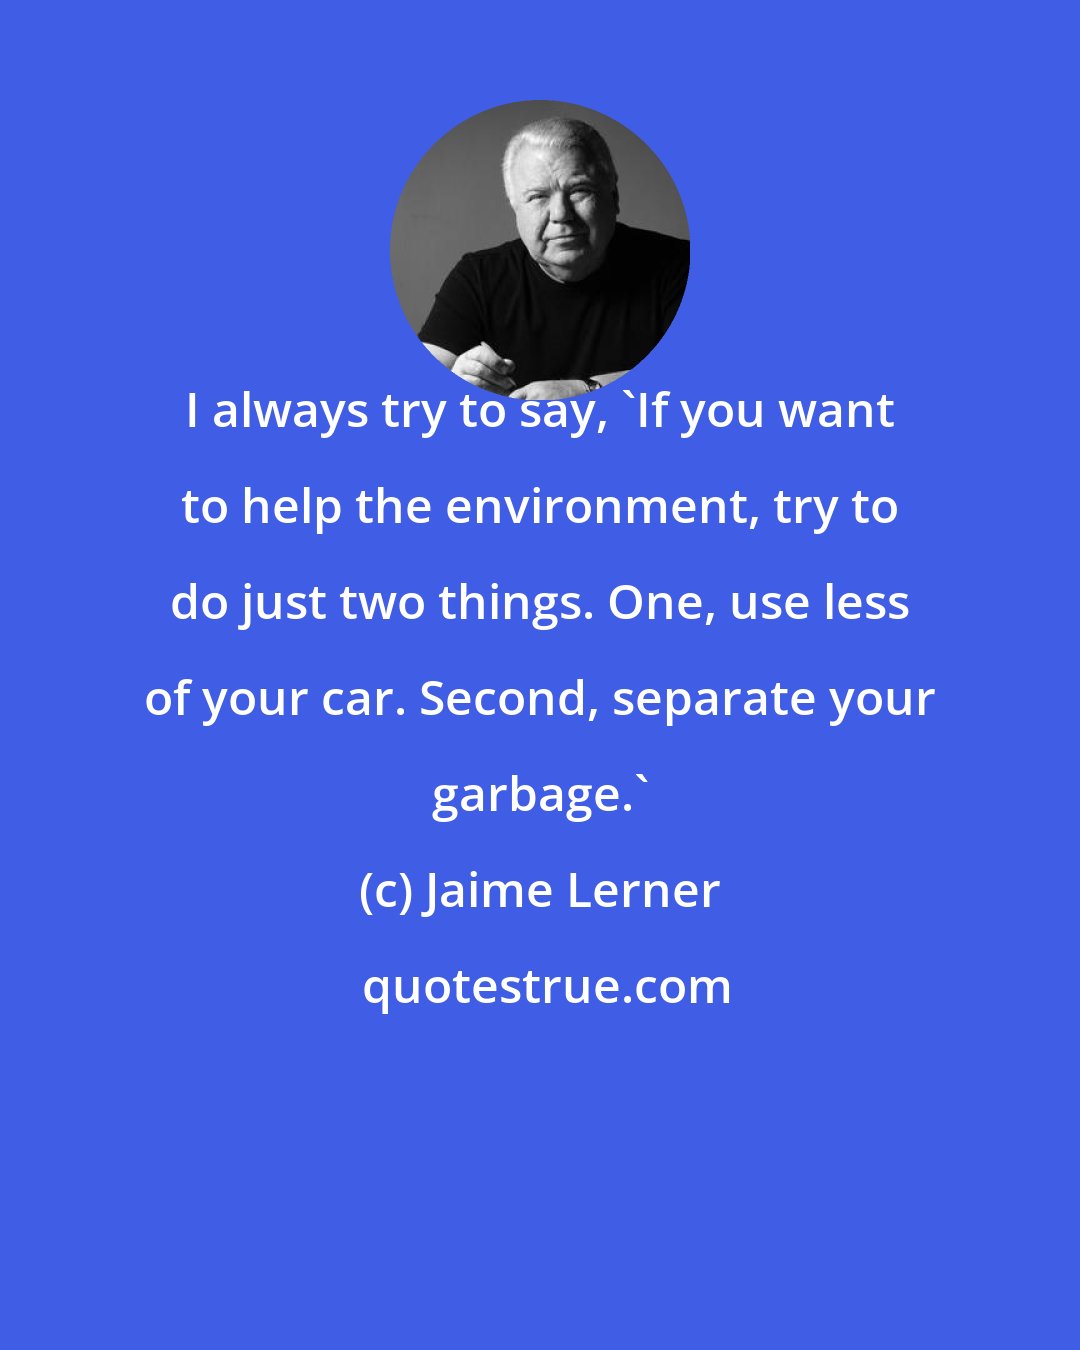 Jaime Lerner: I always try to say, 'If you want to help the environment, try to do just two things. One, use less of your car. Second, separate your garbage.'